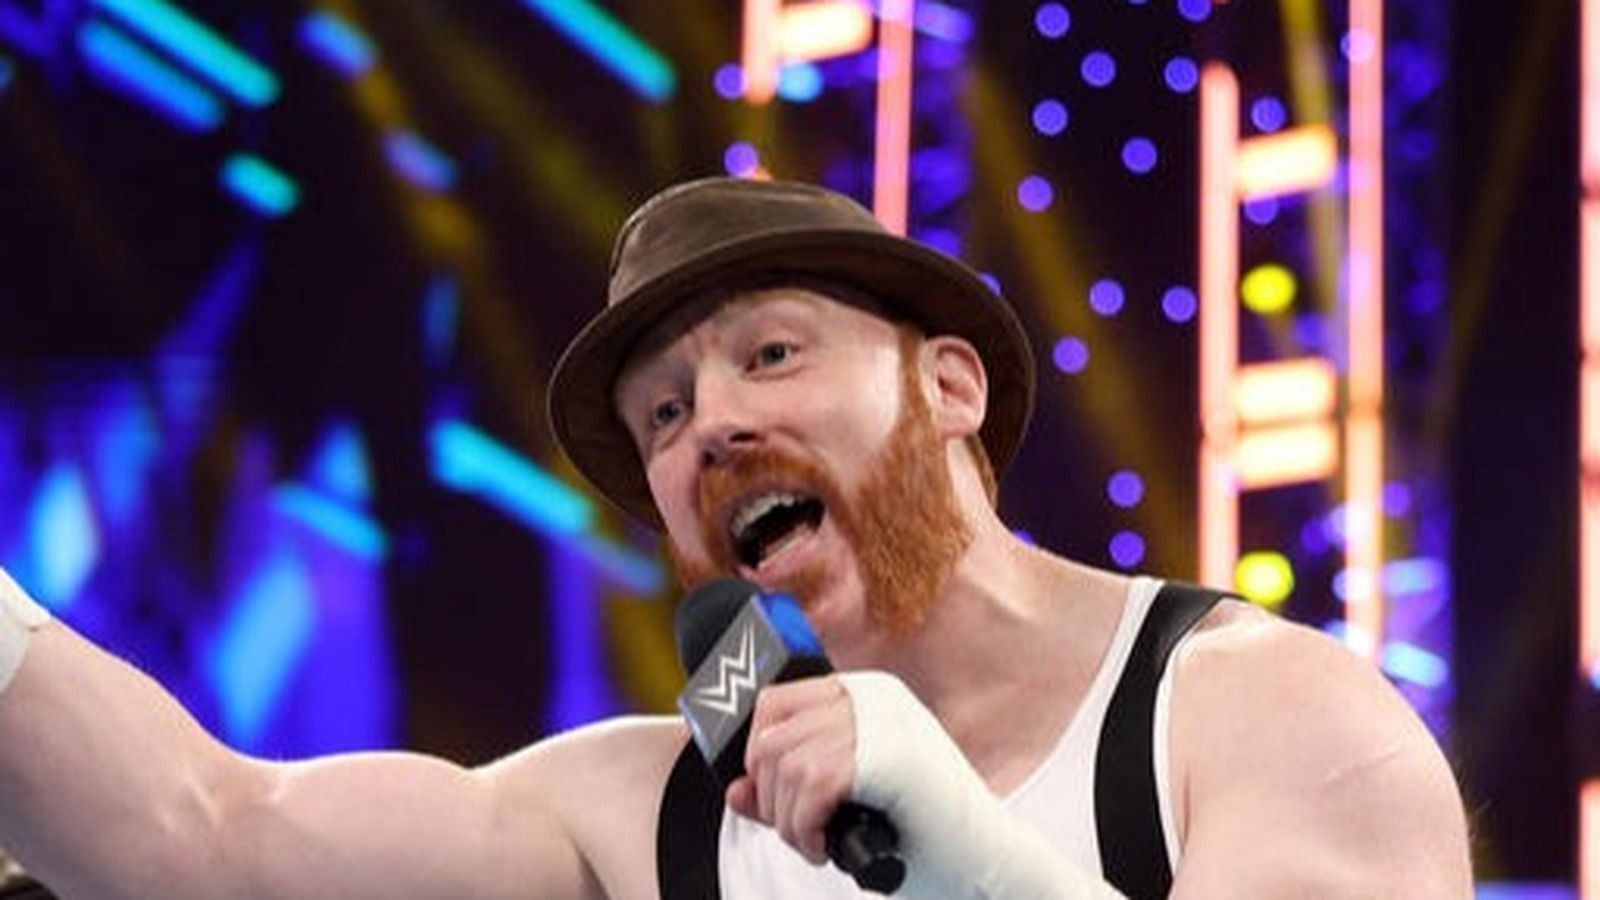 Sheamus was among the Superstars praised